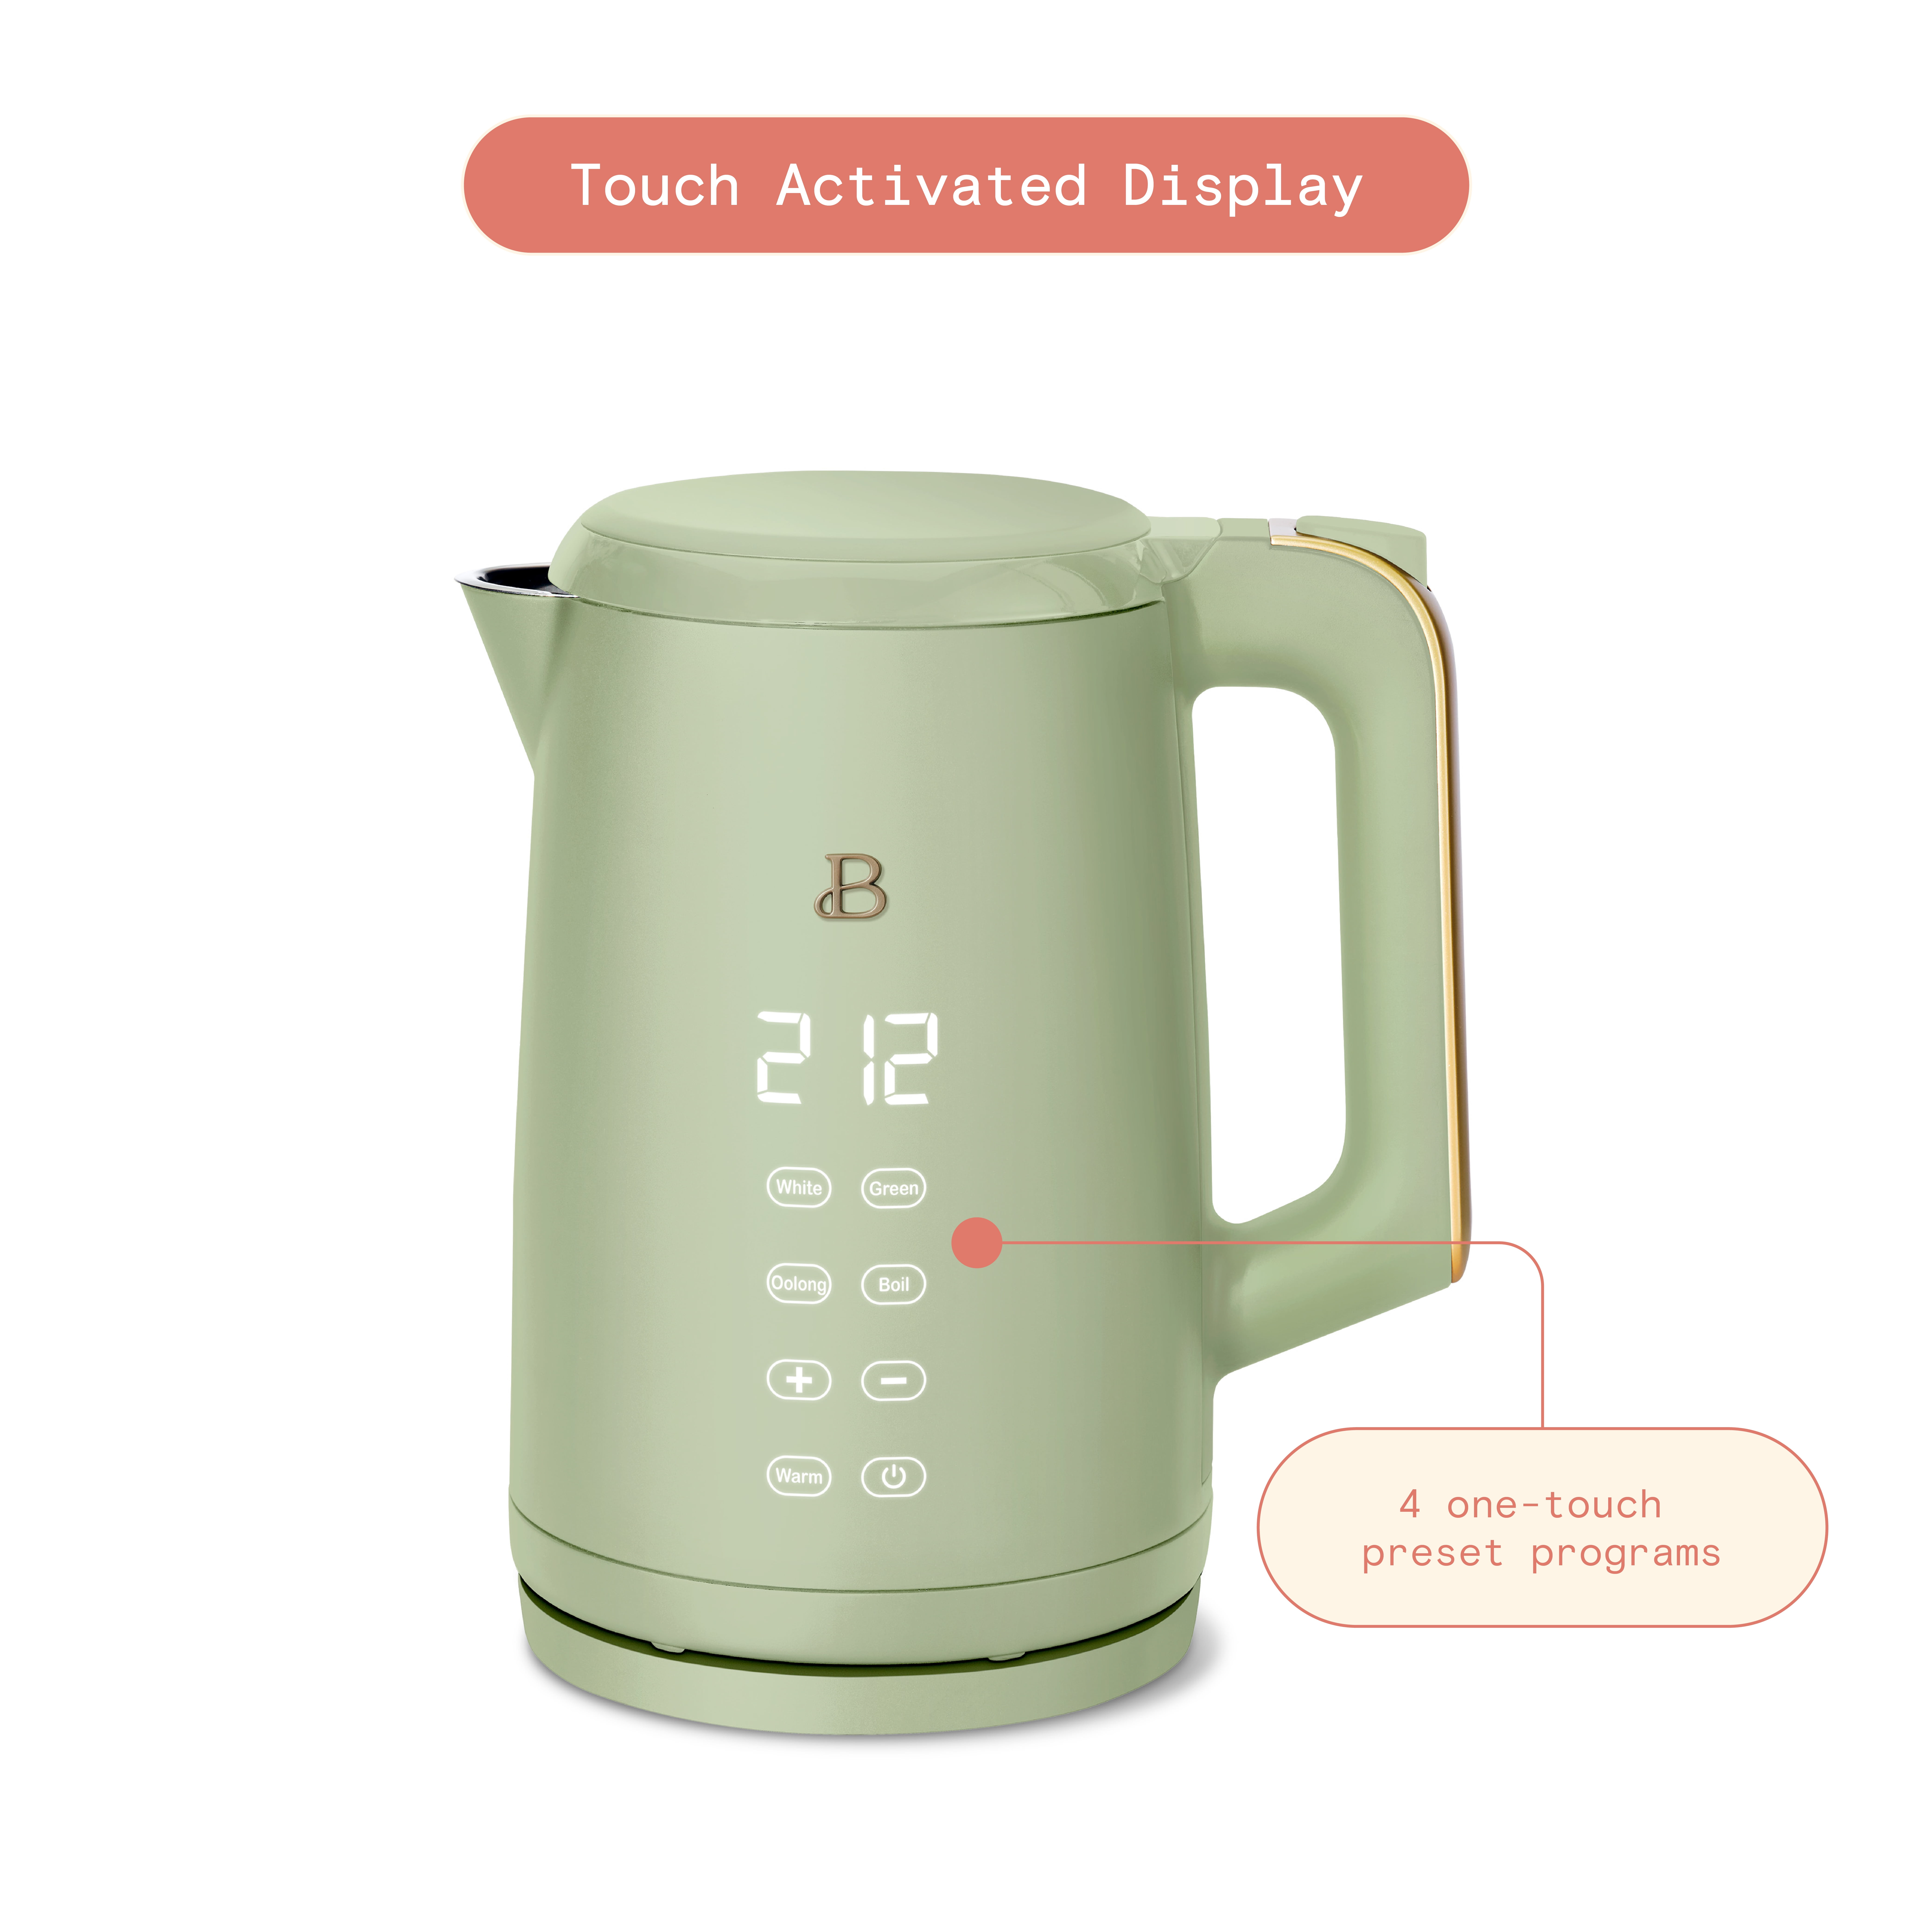 Beautiful 1.7 Liter One-Touch Electric Kettle, White Icing by Drew Barrymore